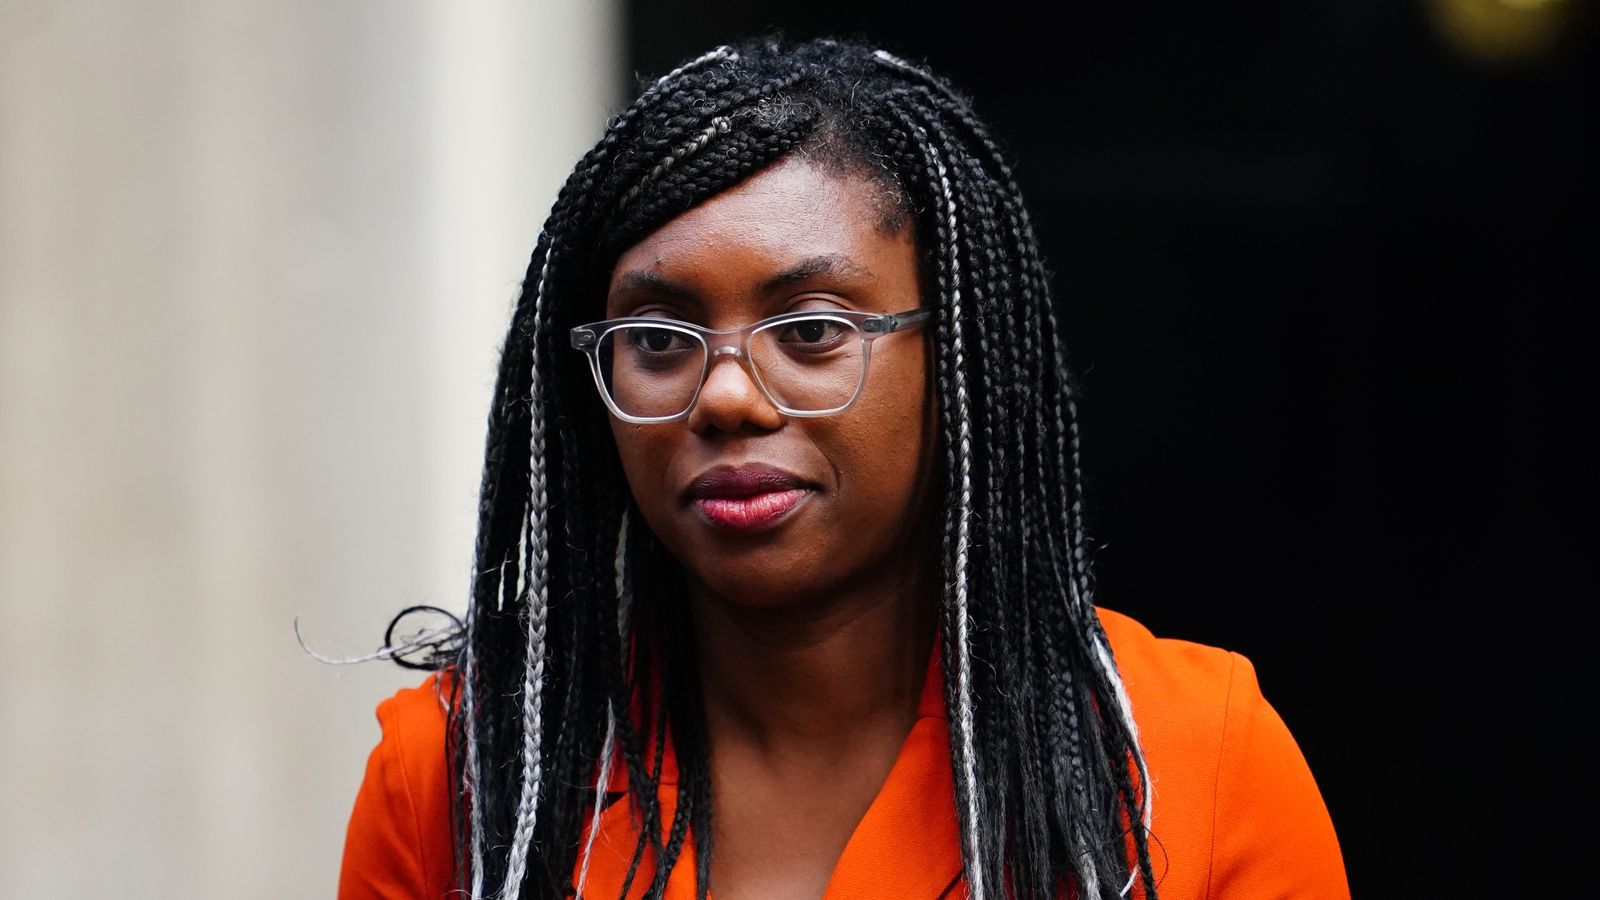 Government struggled to control talk of COVID 'conspiracies' during pandemic, Kemi Badenoch tells inquiry